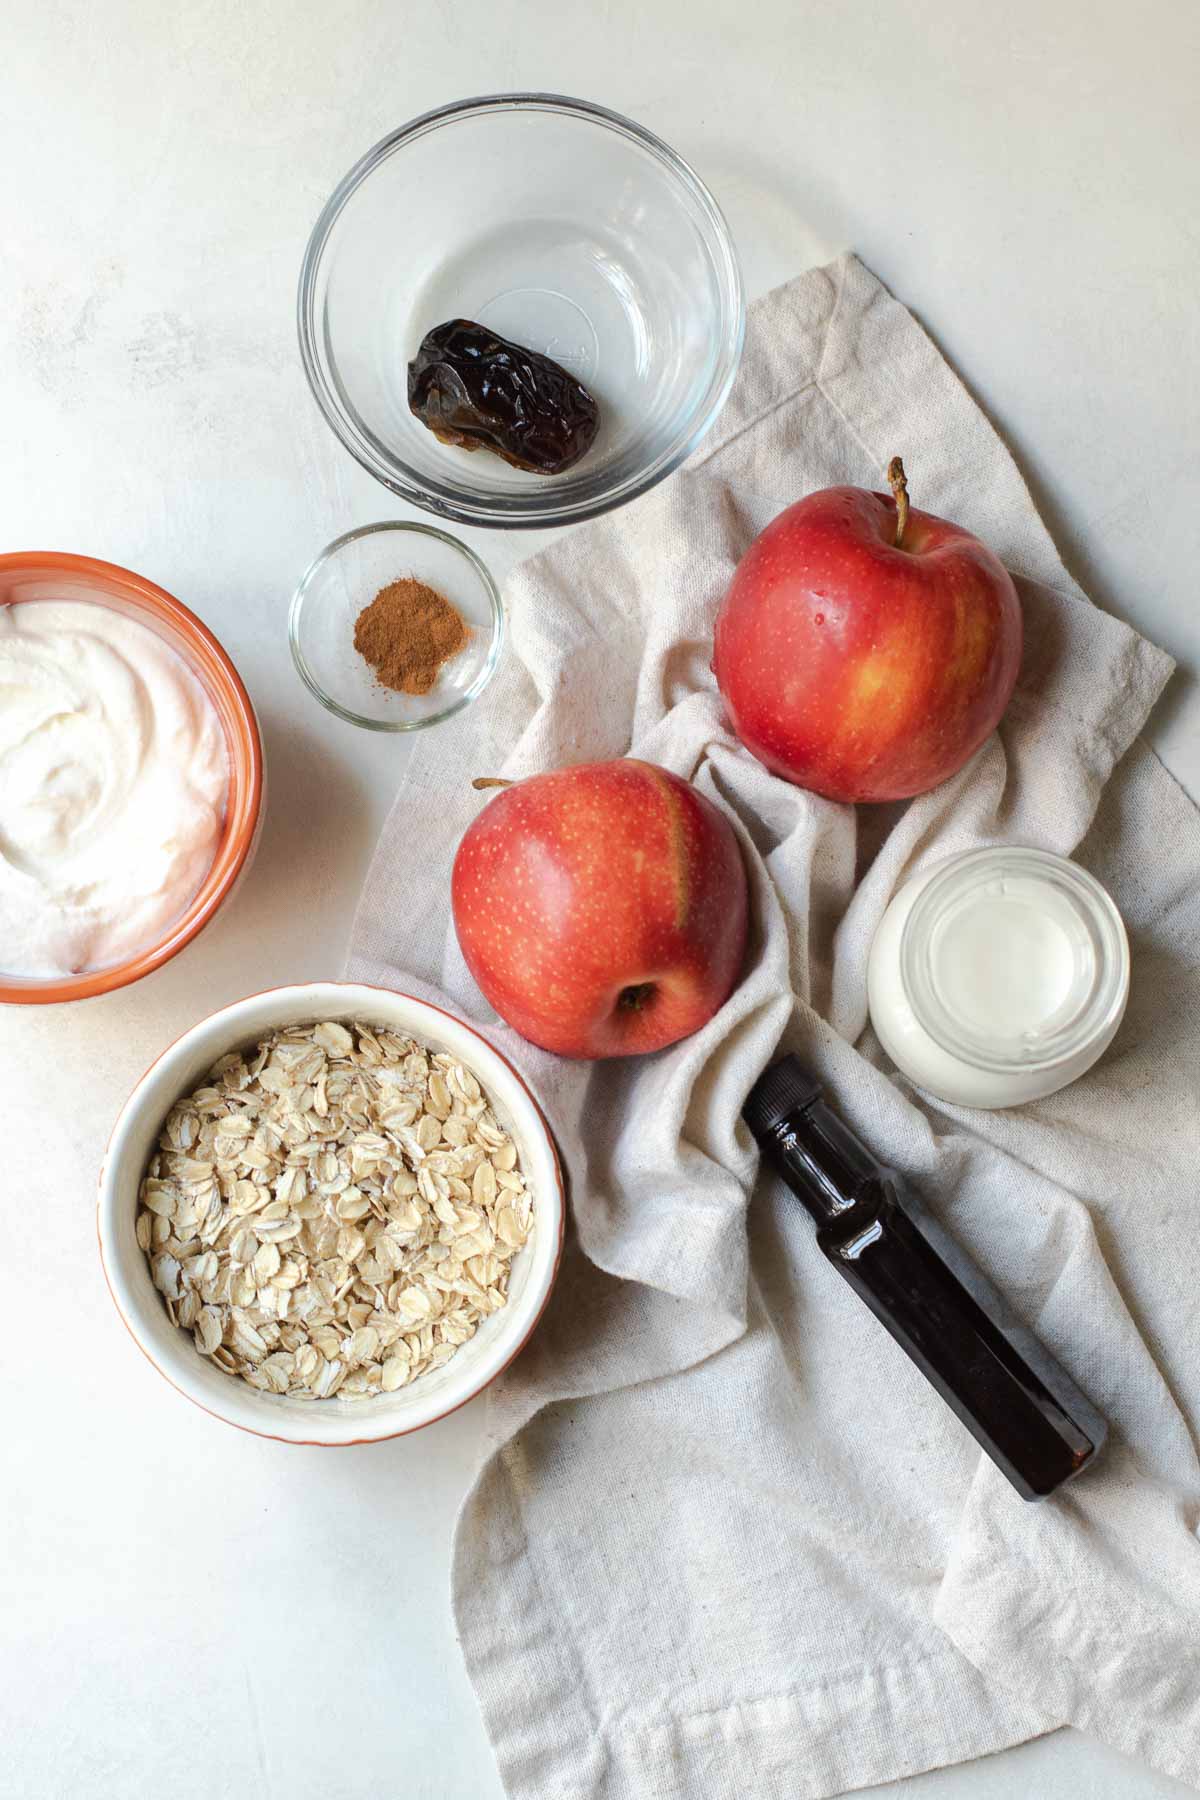 All ingredients on a gray background: 1 date, two apples, cinnamon, milk, vanilla extract bottle, oats, and plain yogurt.